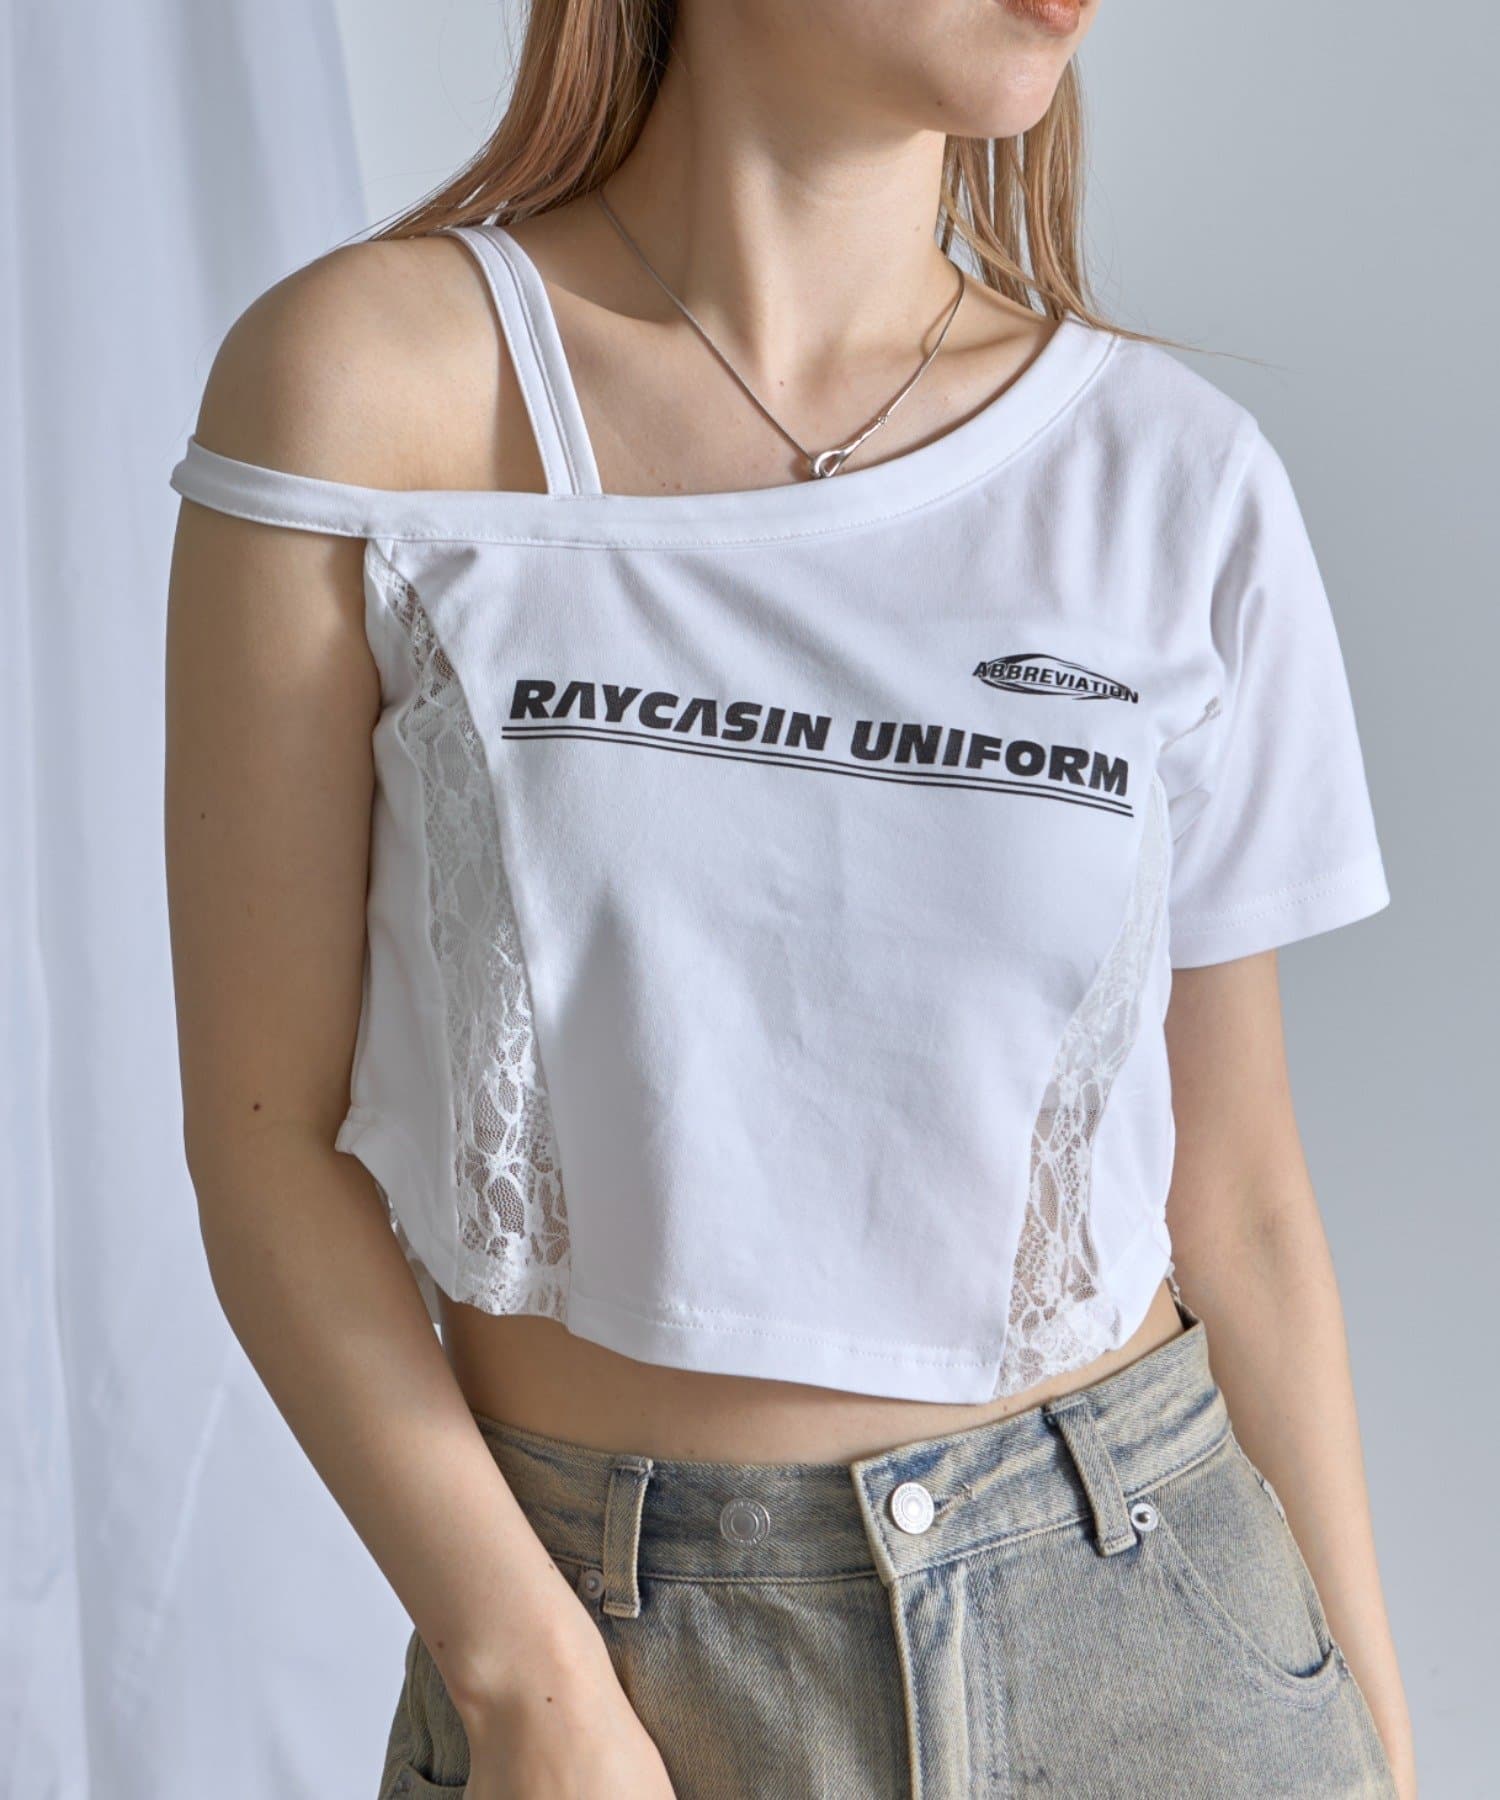 OUTLET(アウトレット) 【RAY CASSIN】レース切替ロゴTシャツ